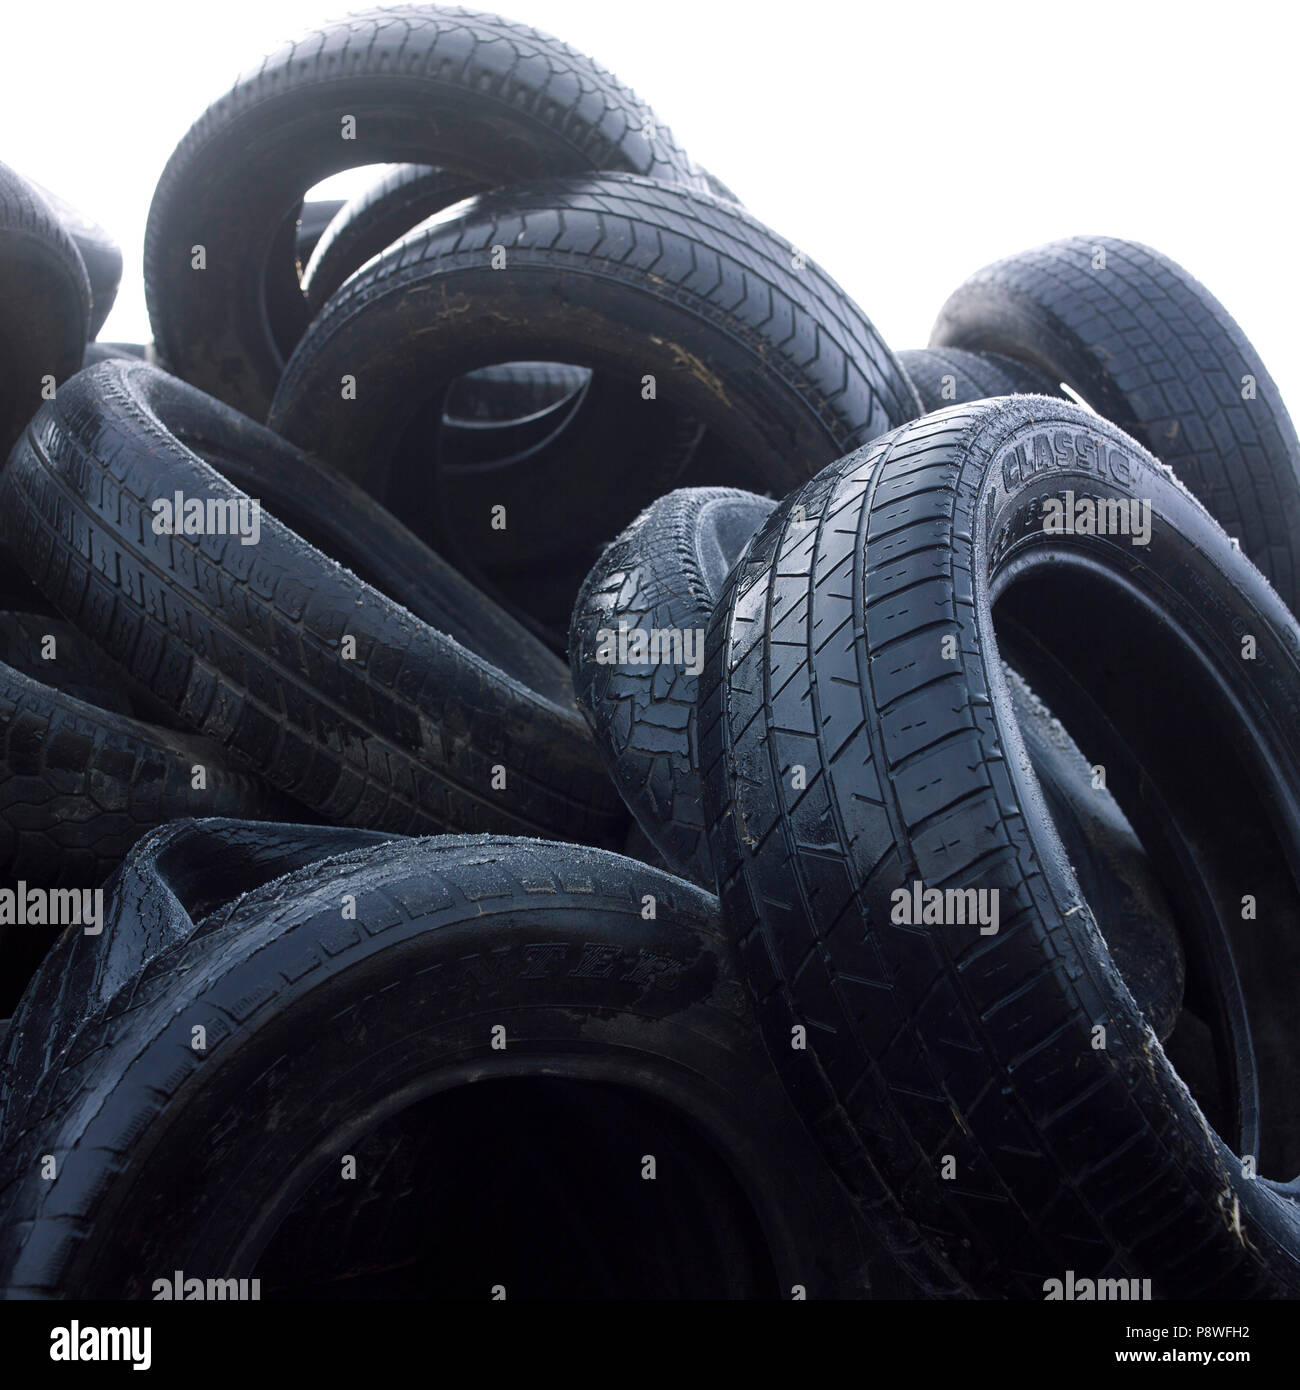 Pile of old worn tires, close up, France, Europe Stock Photo